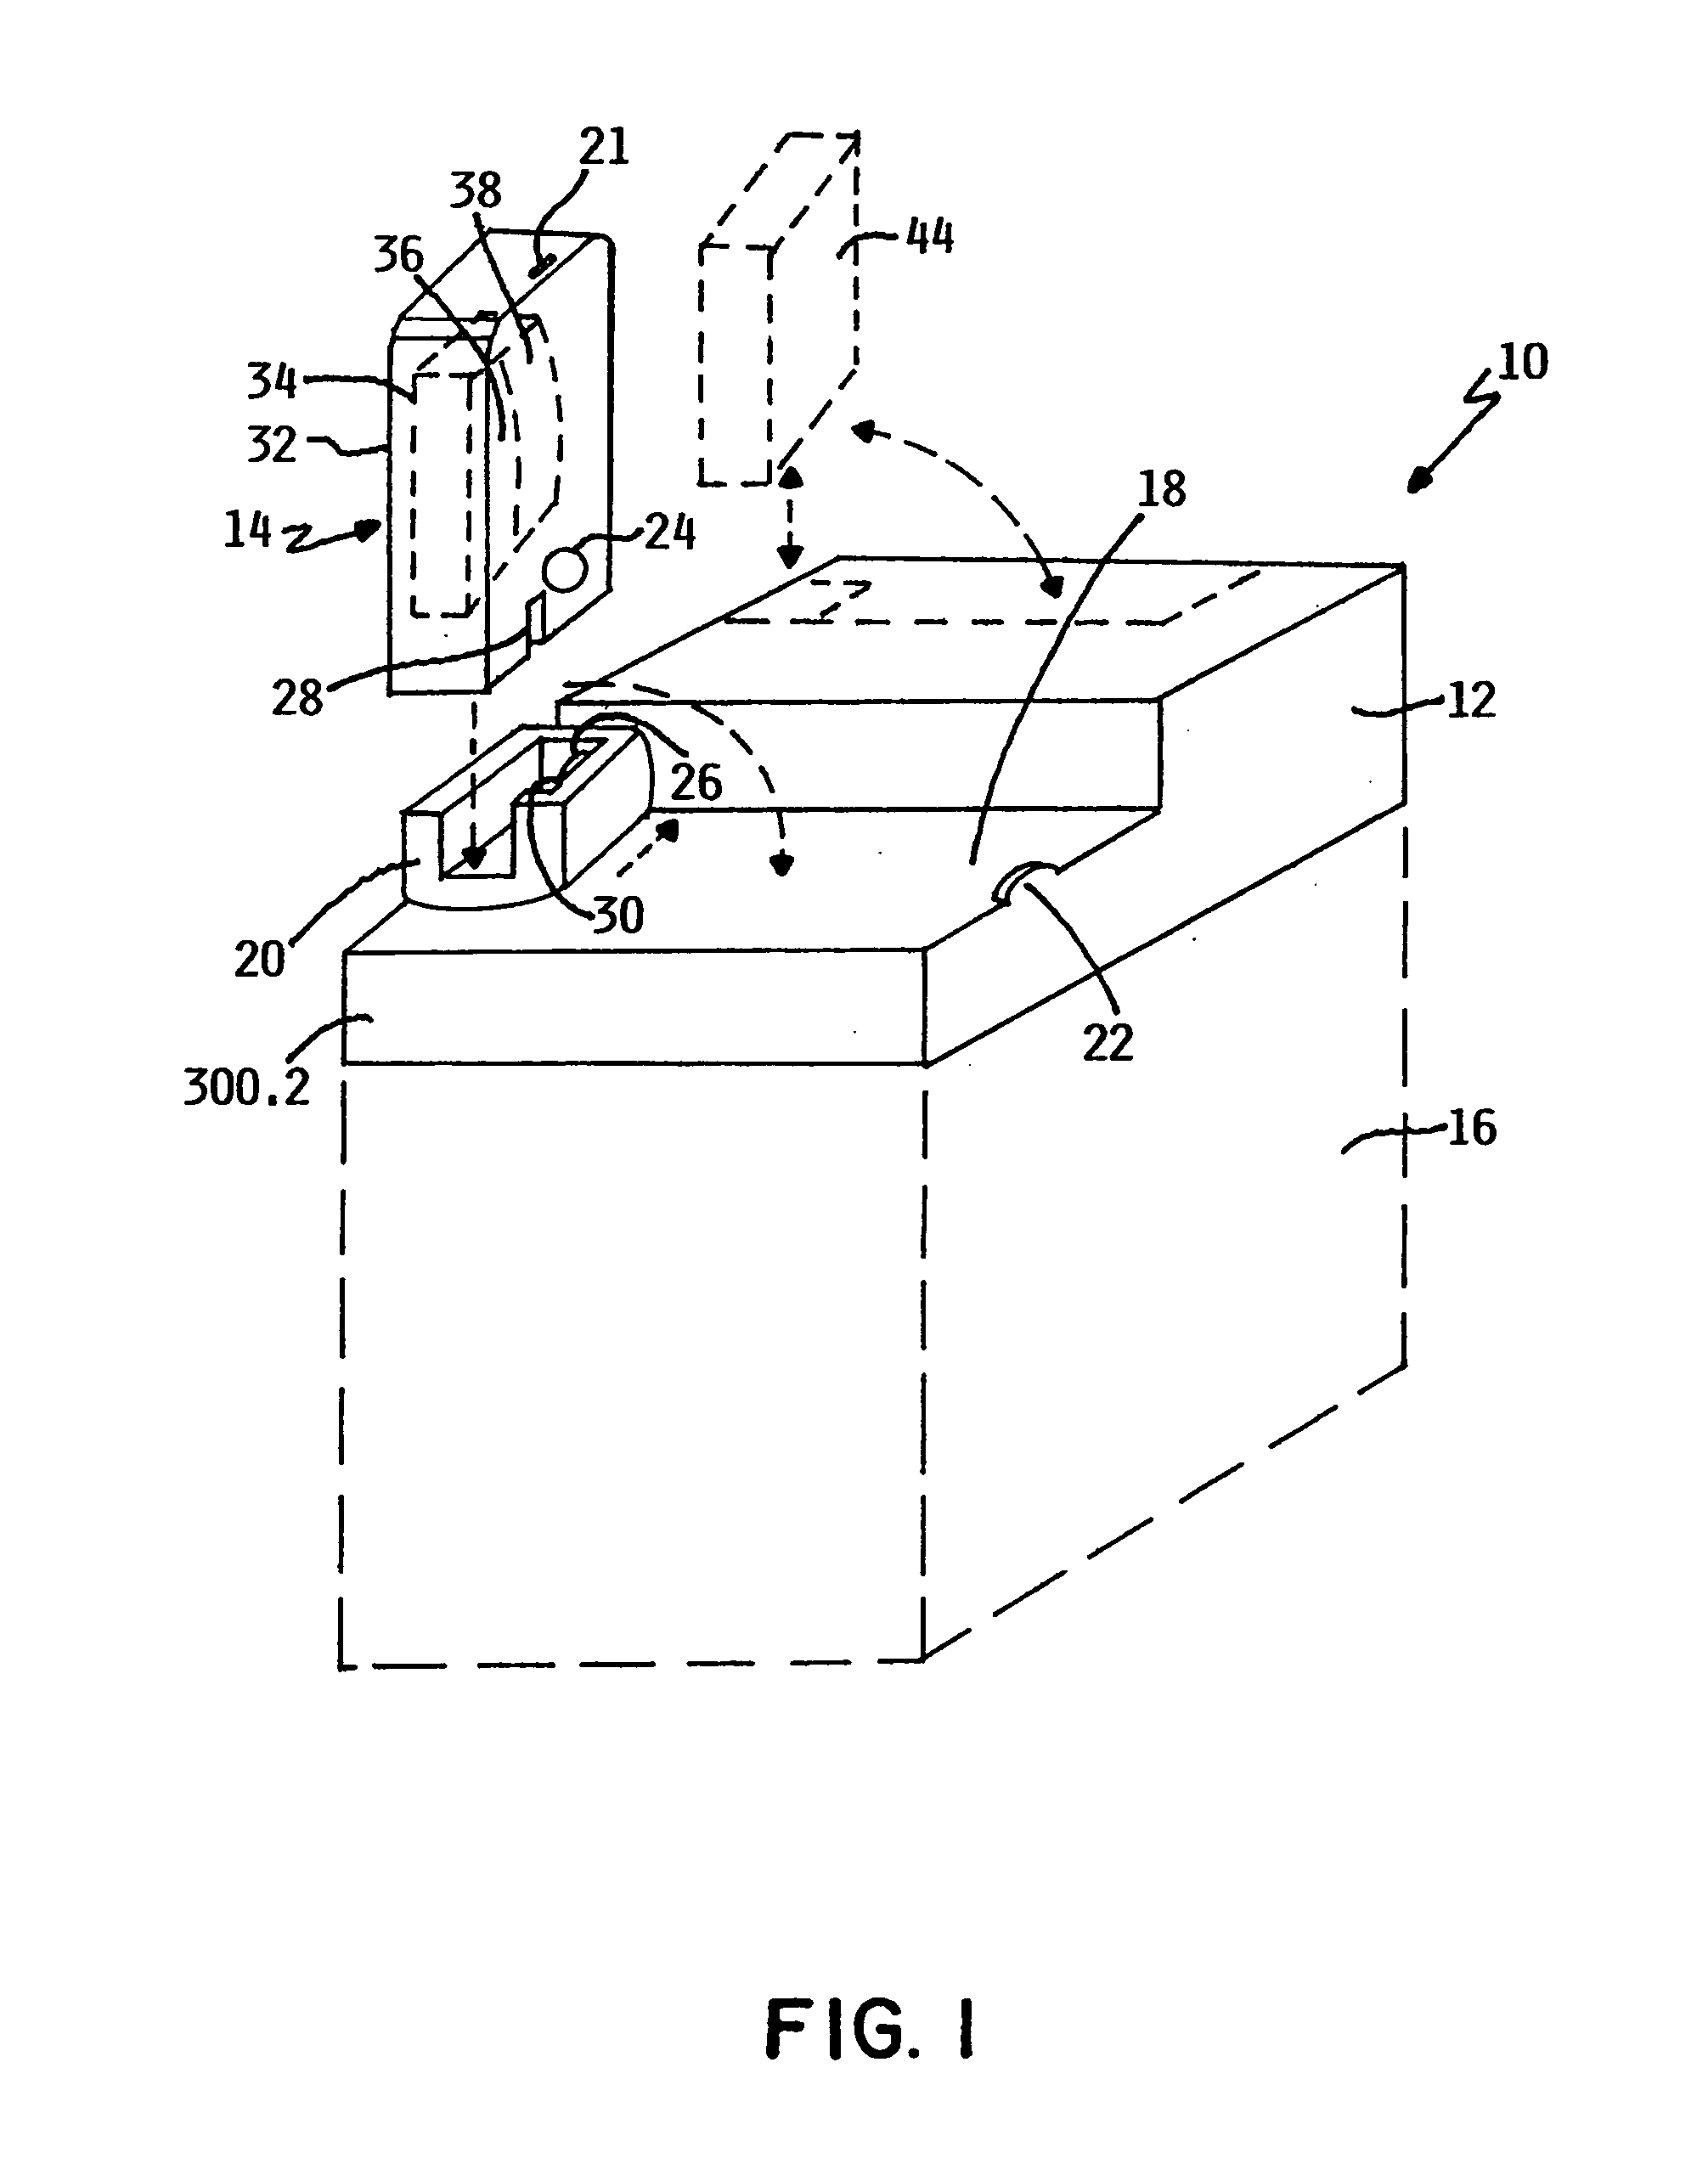 Connector assembly for fluid transfer